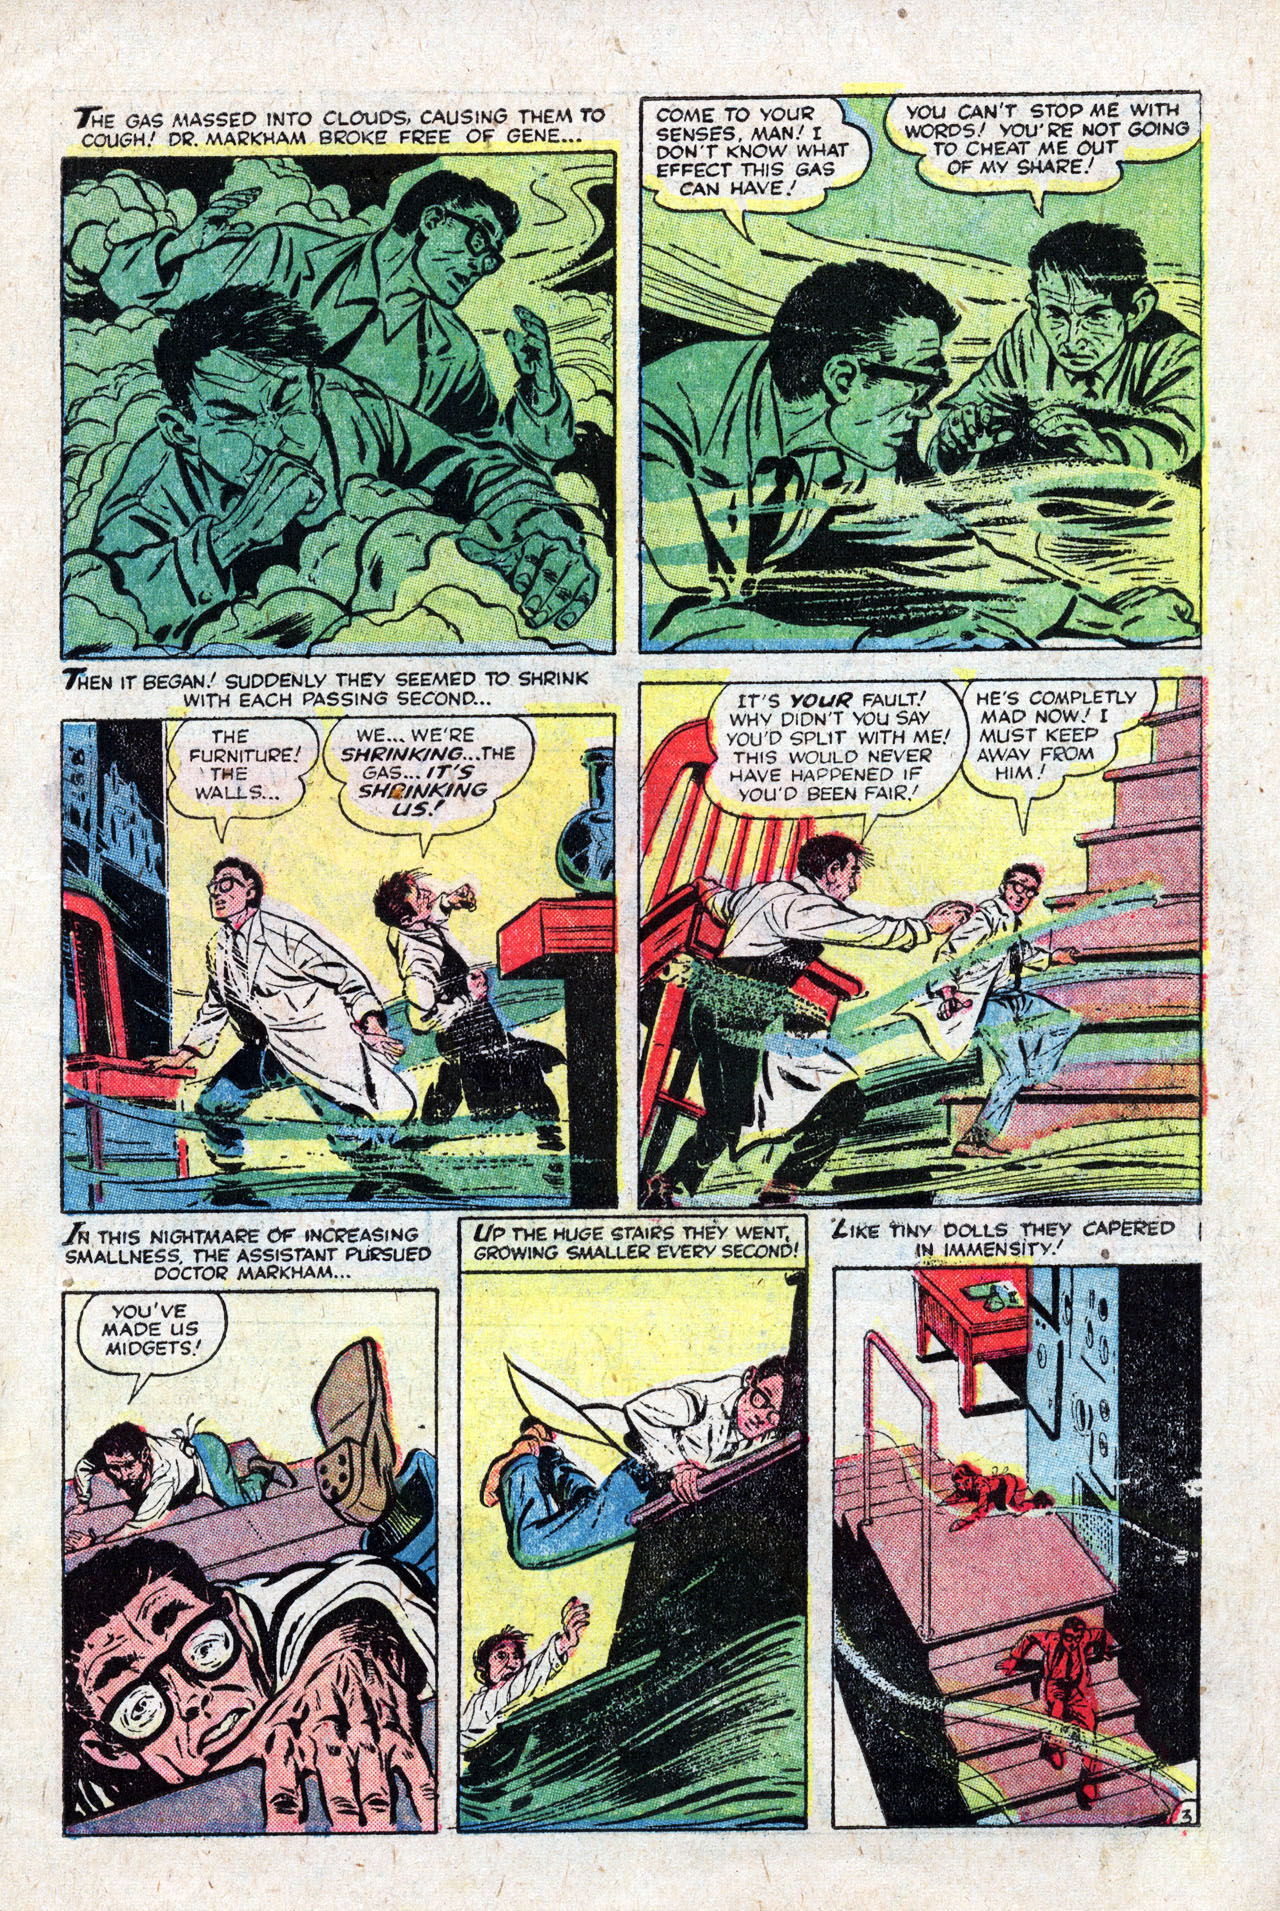 Marvel Tales (1949) 150 Page 14